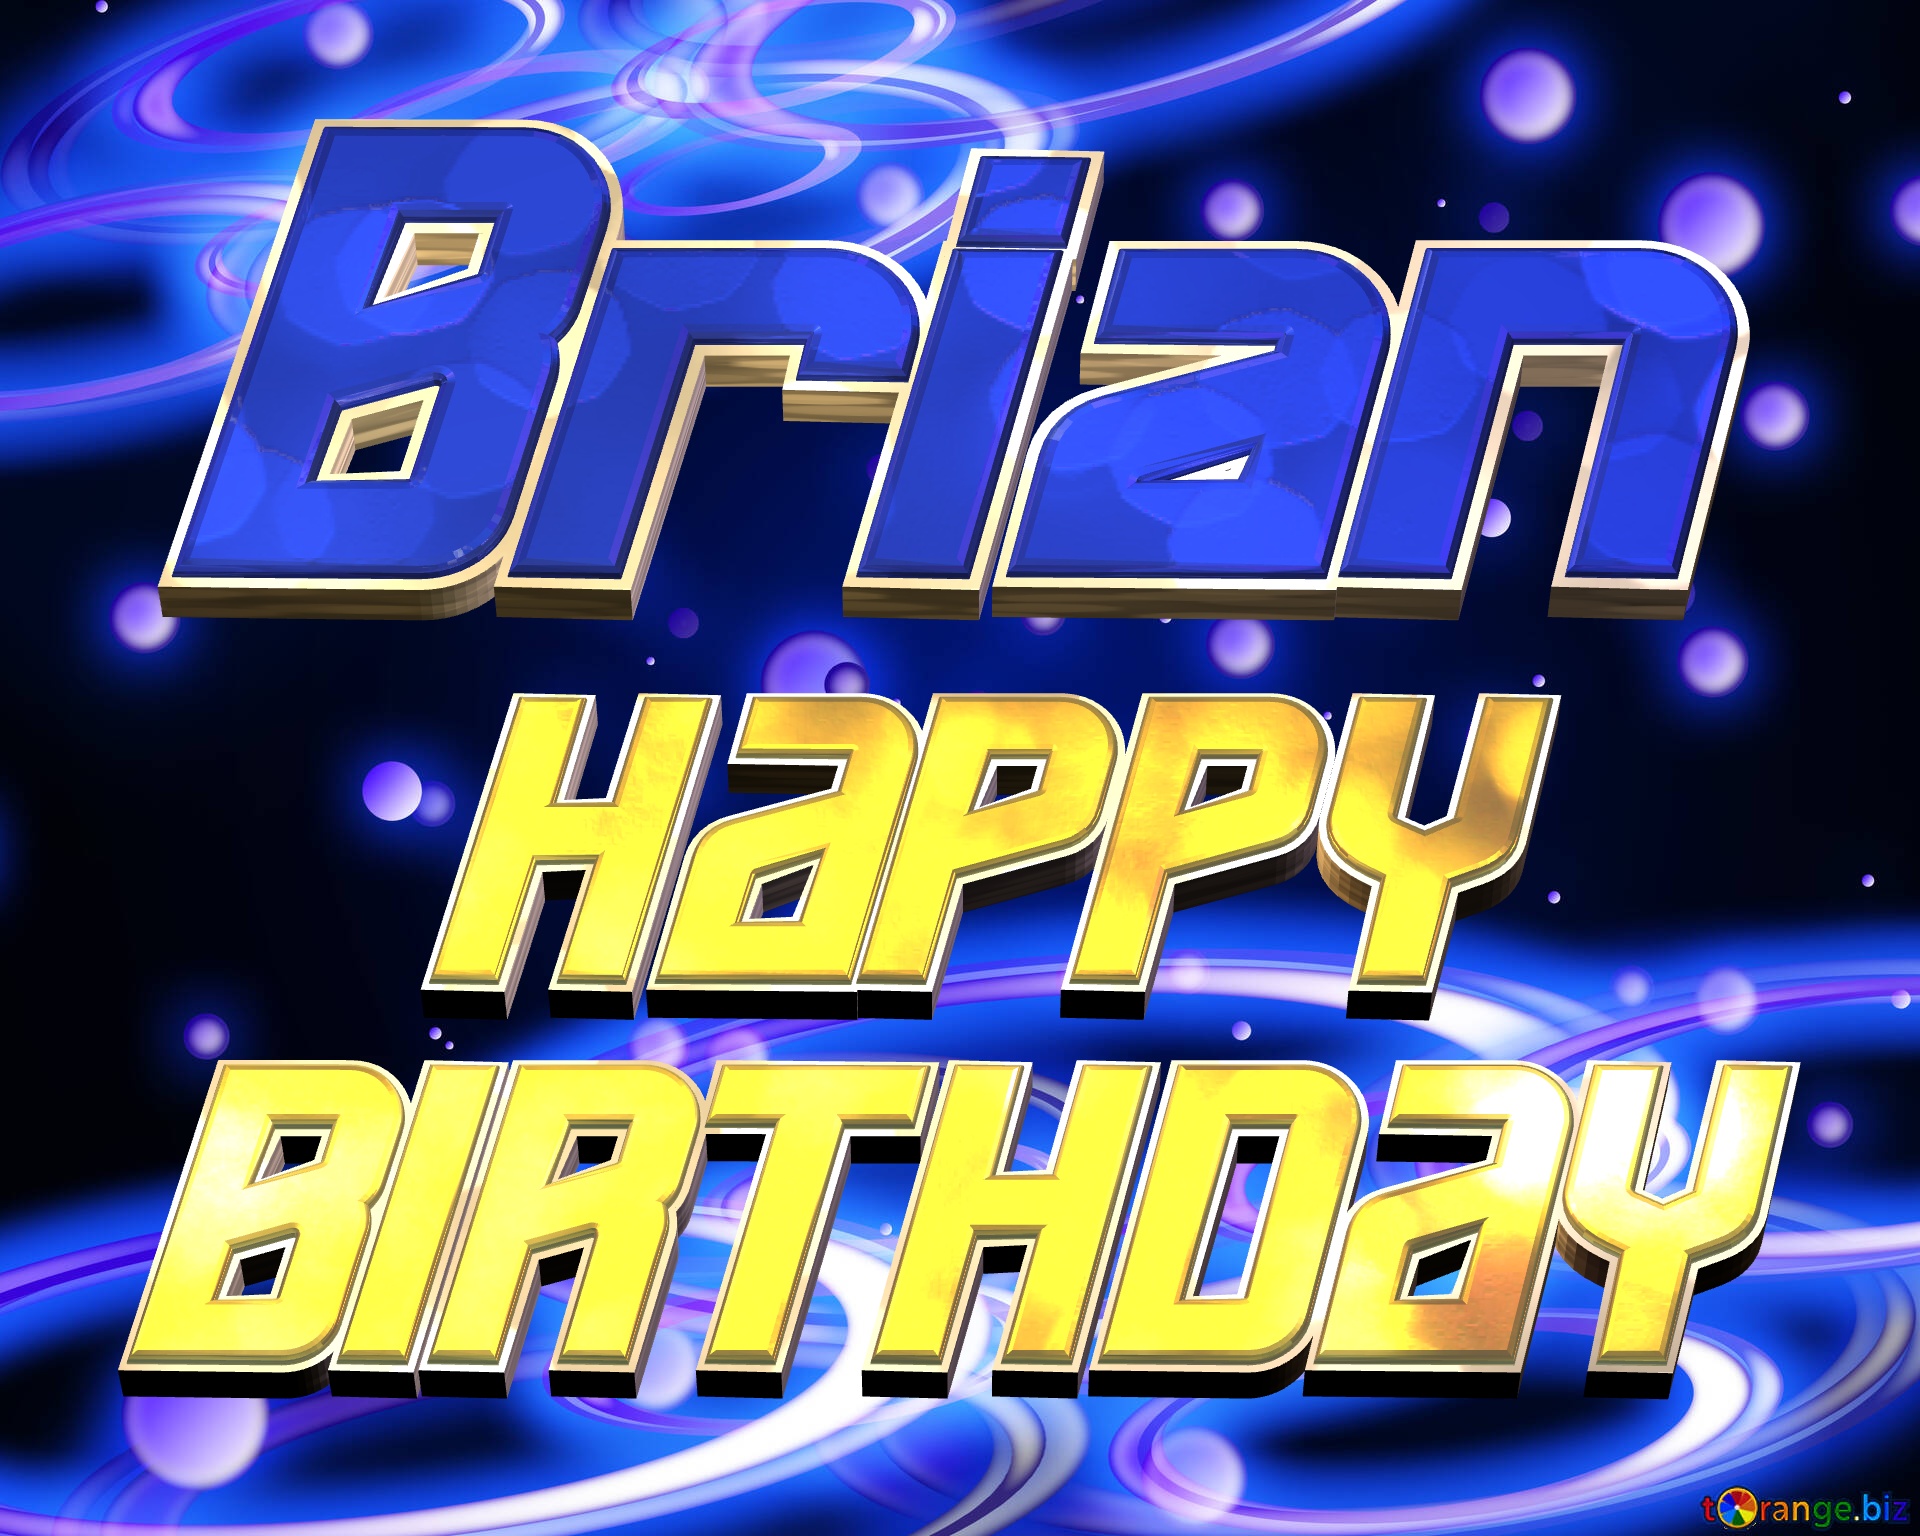 Brian Space Happy Birthday! Technology background №54919